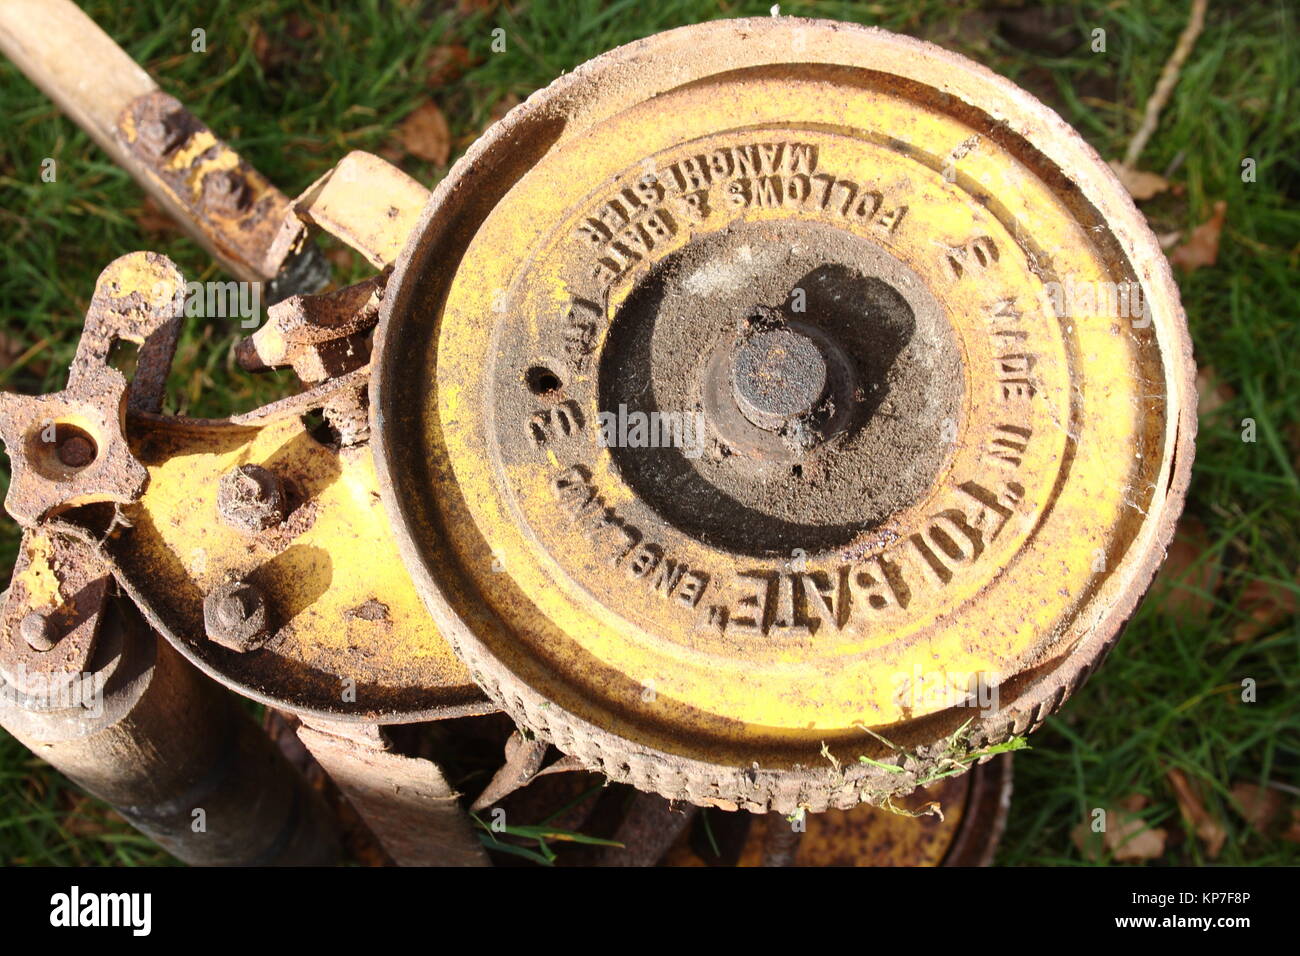 Old Hand push lawn mover, wheel that moves its blade round, and shows company detail Stock Photo